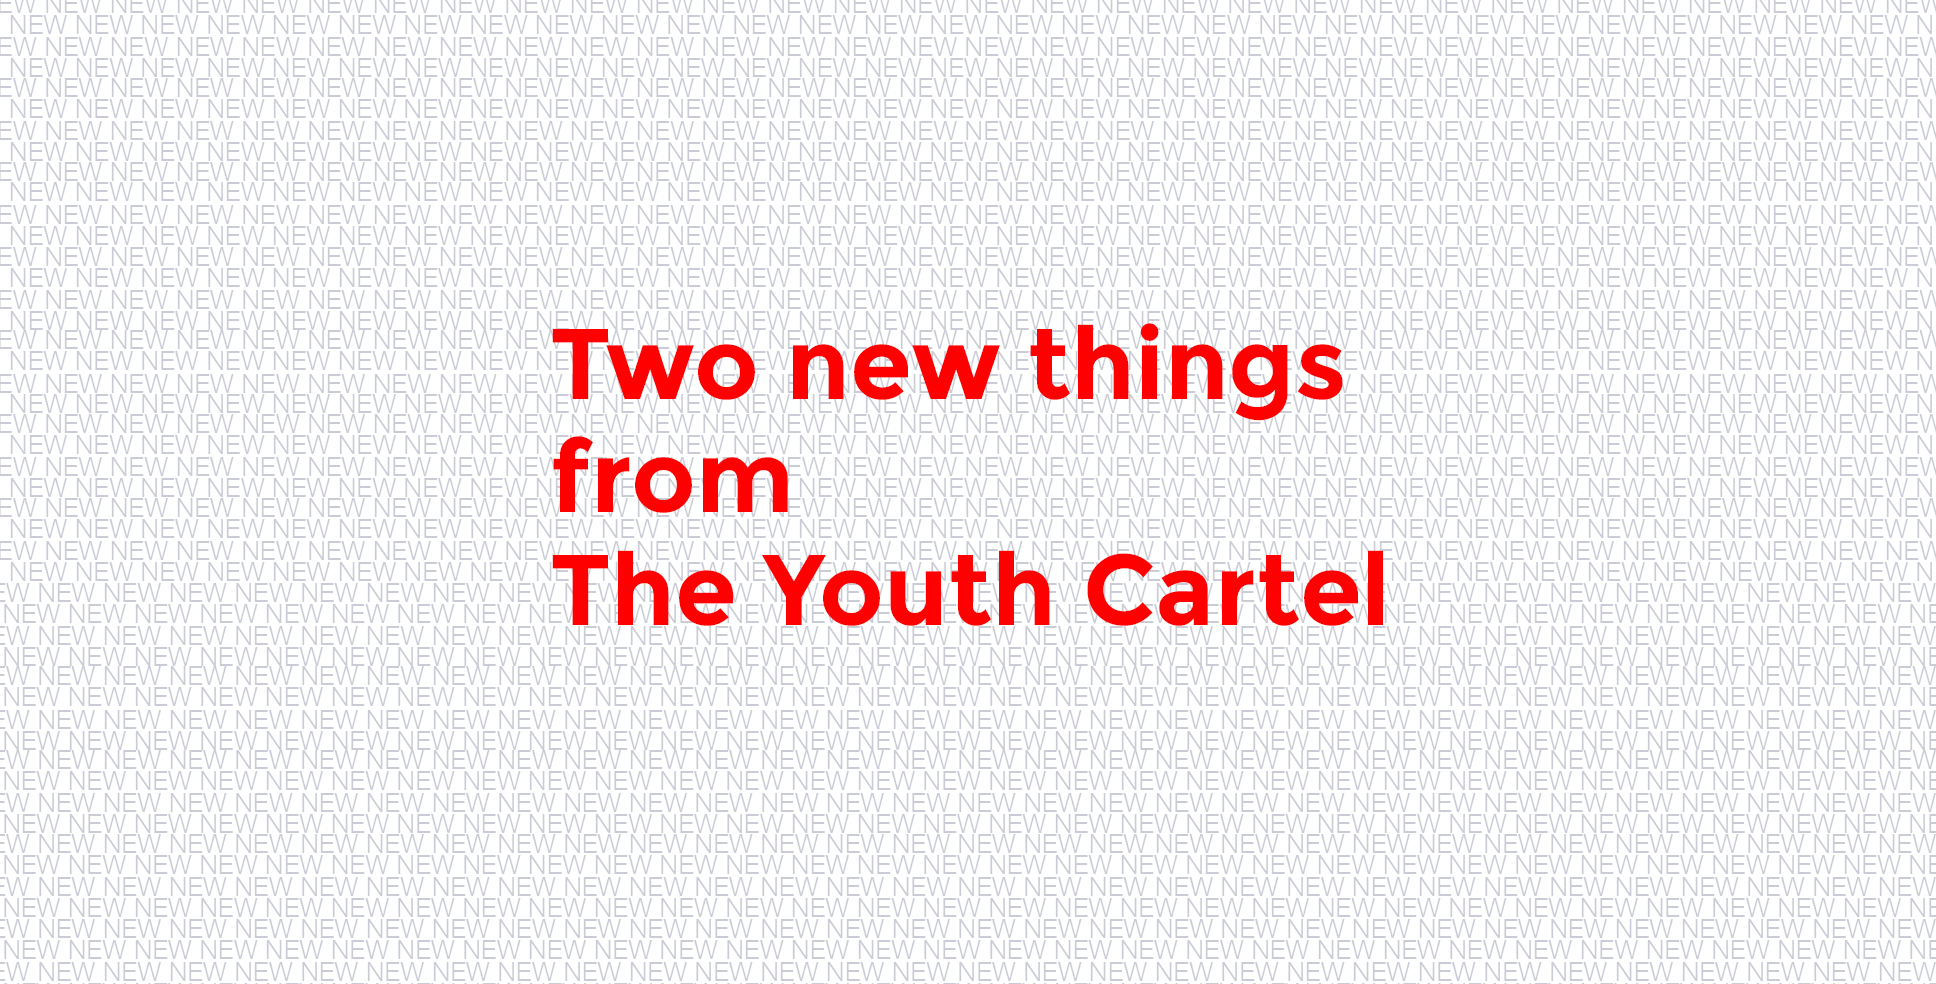 Two new things from The Youth Cartel